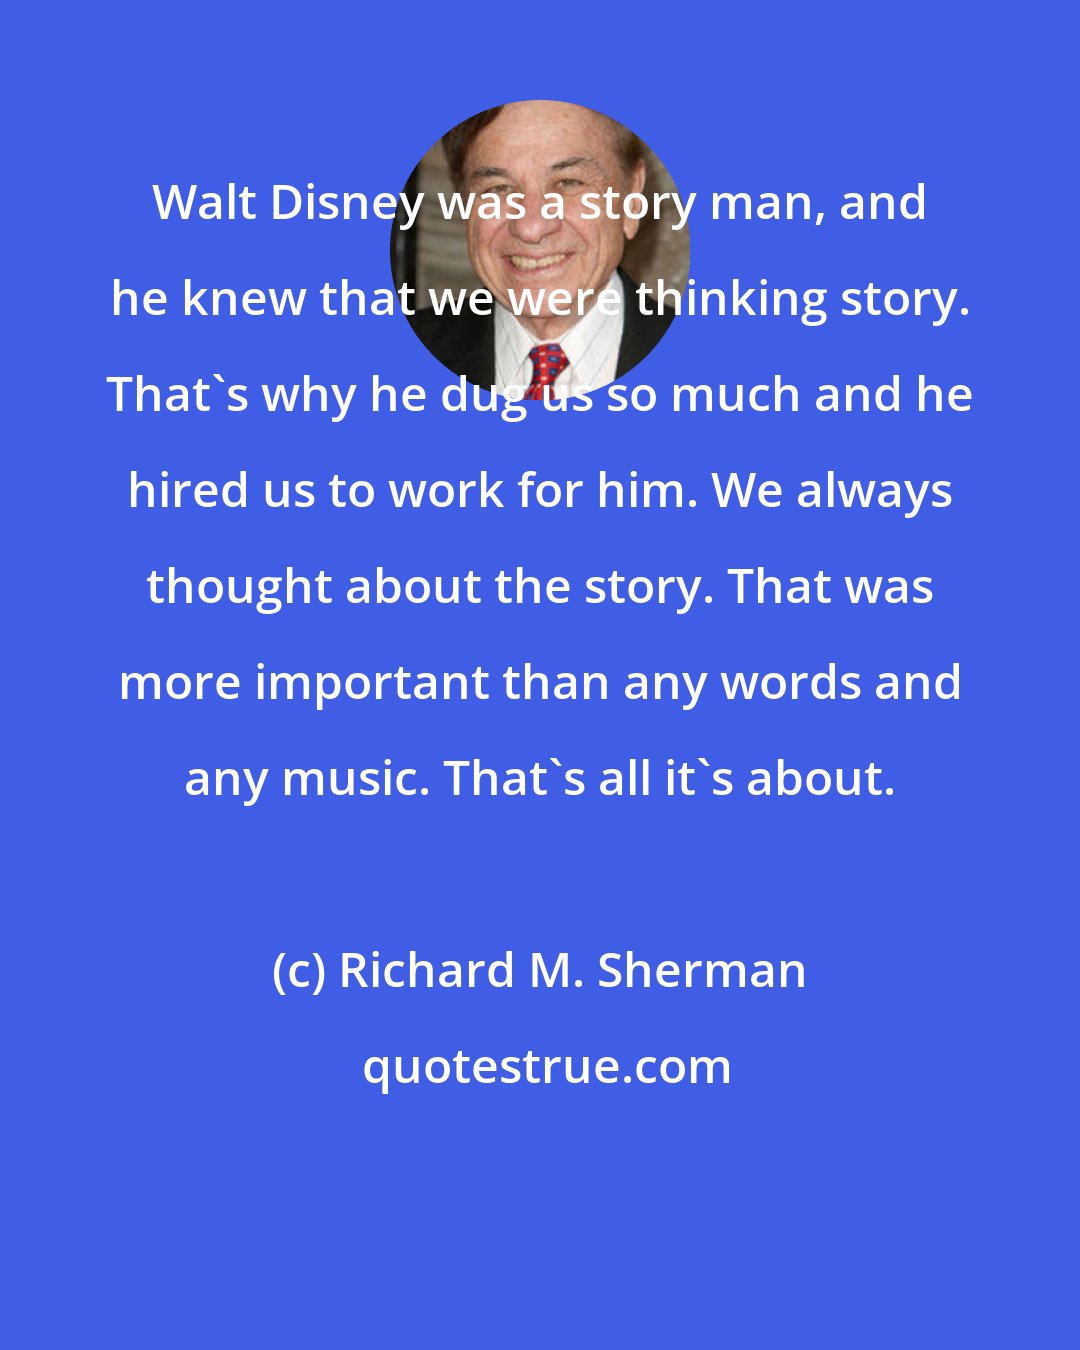 Richard M. Sherman: Walt Disney was a story man, and he knew that we were thinking story. That's why he dug us so much and he hired us to work for him. We always thought about the story. That was more important than any words and any music. That's all it's about.